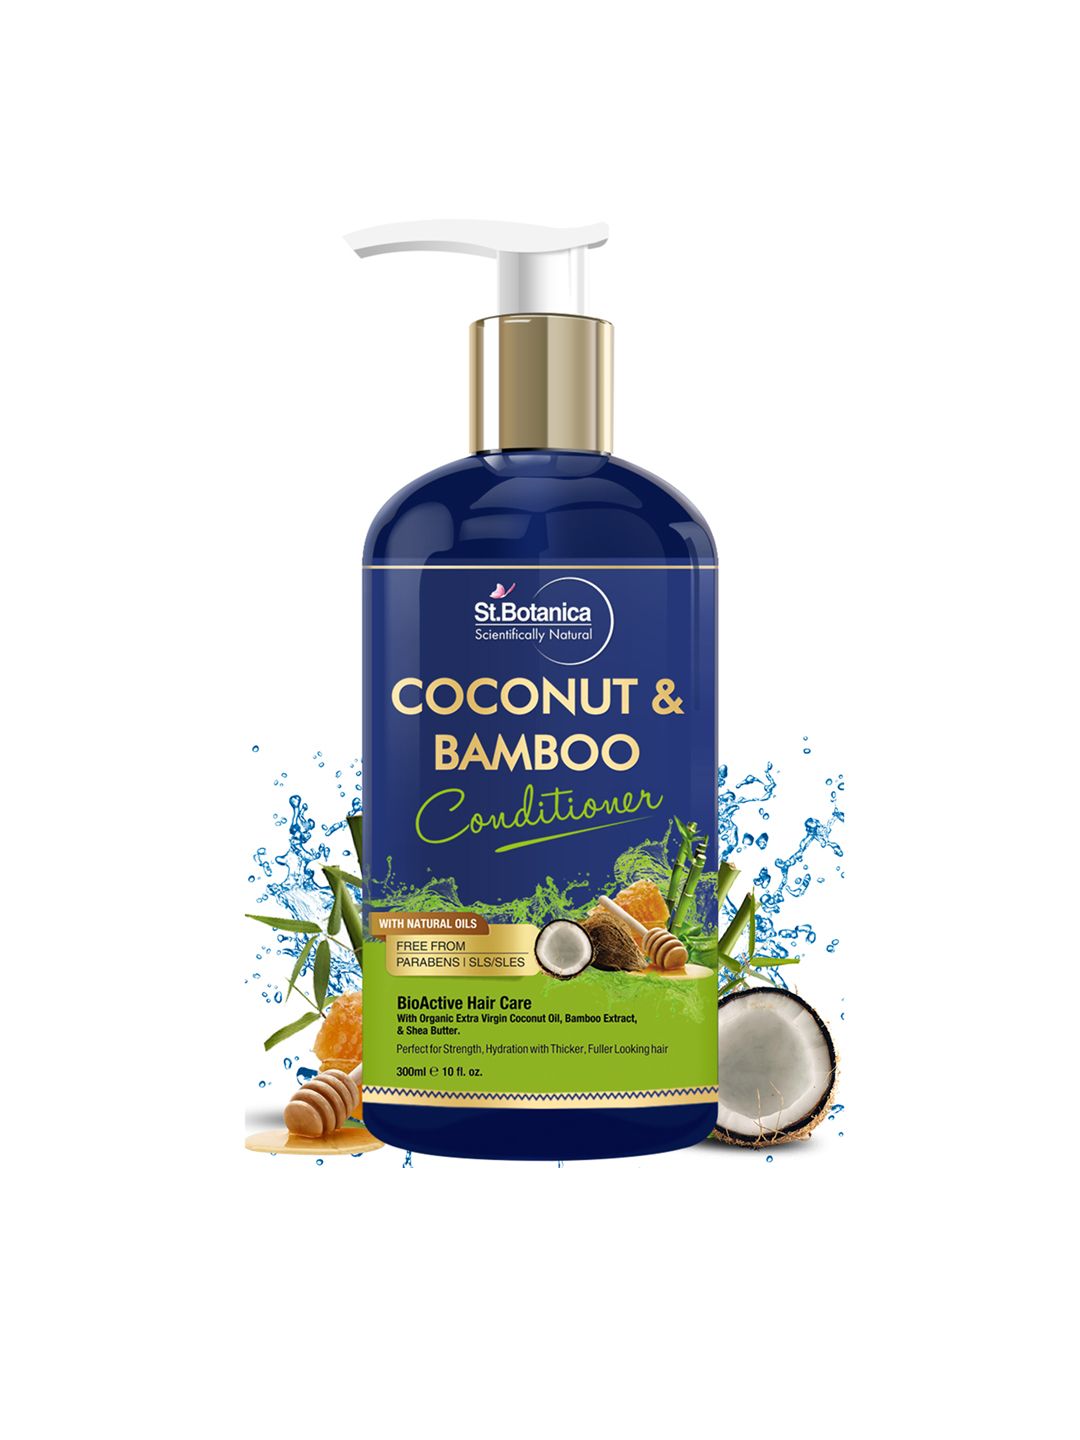 St.Botanica Coconut & Bamboo Hair Conditioner, 300ml Price in India